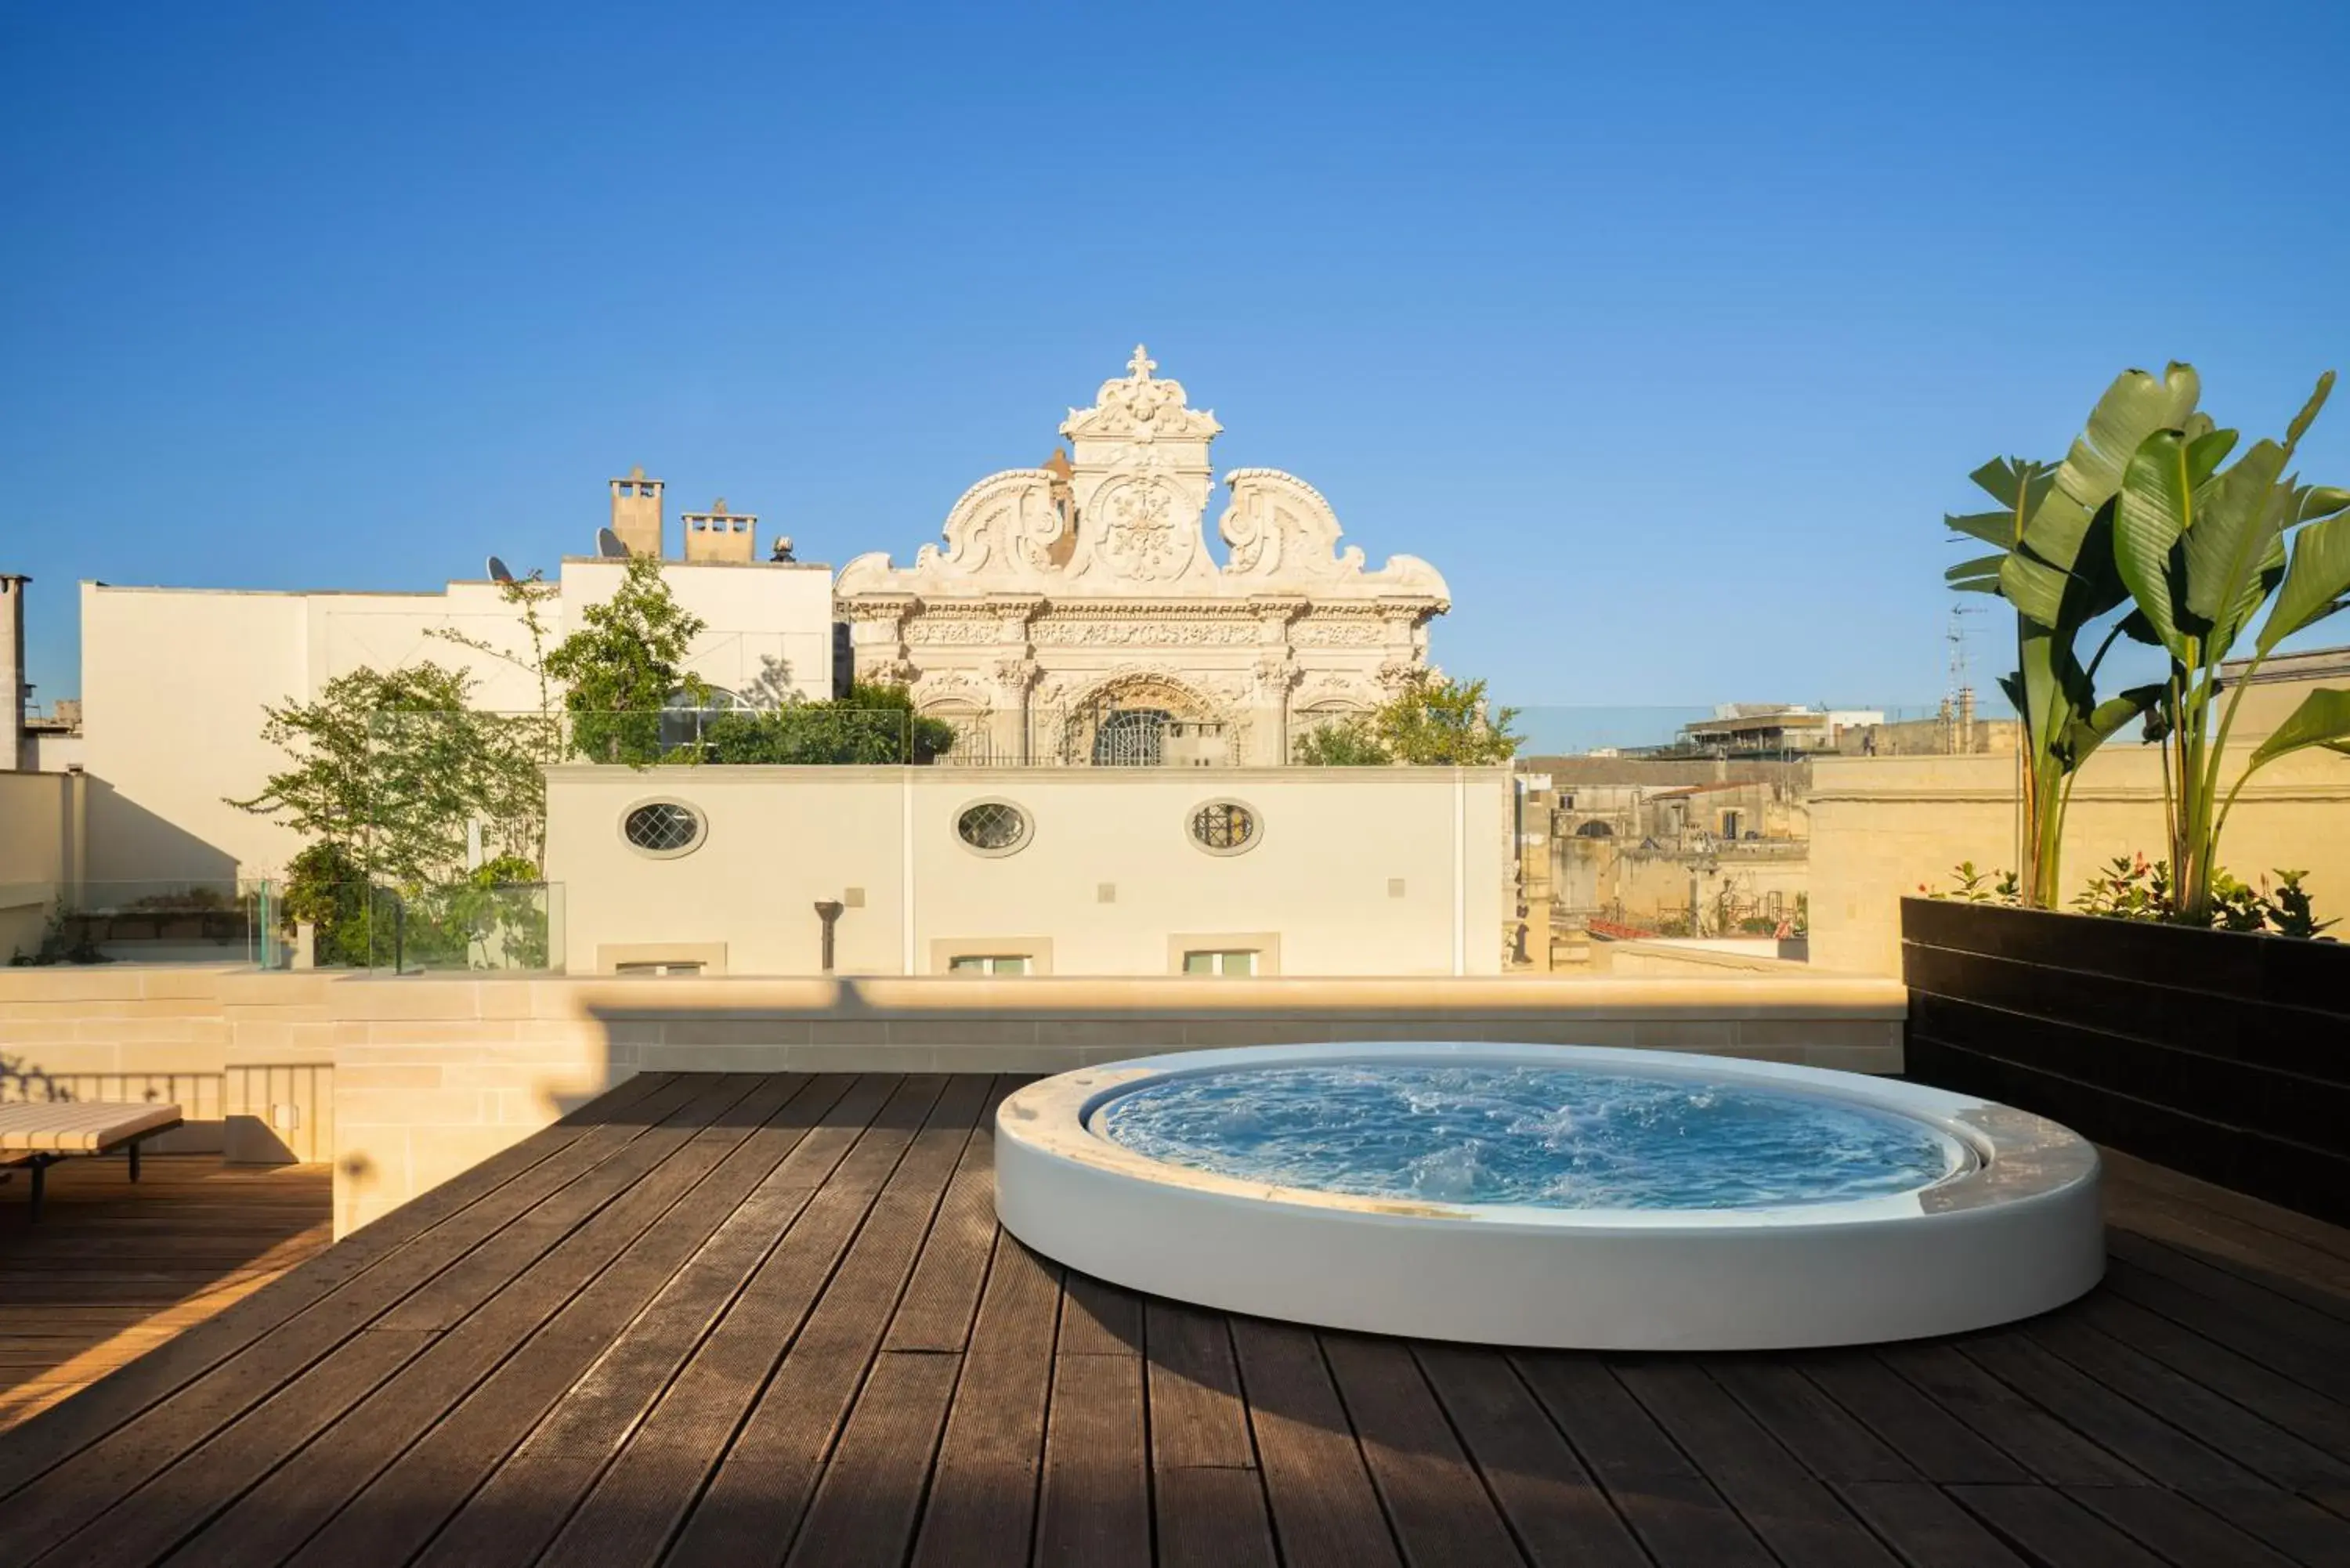 Hot Tub, Swimming Pool in Patria Palace Lecce